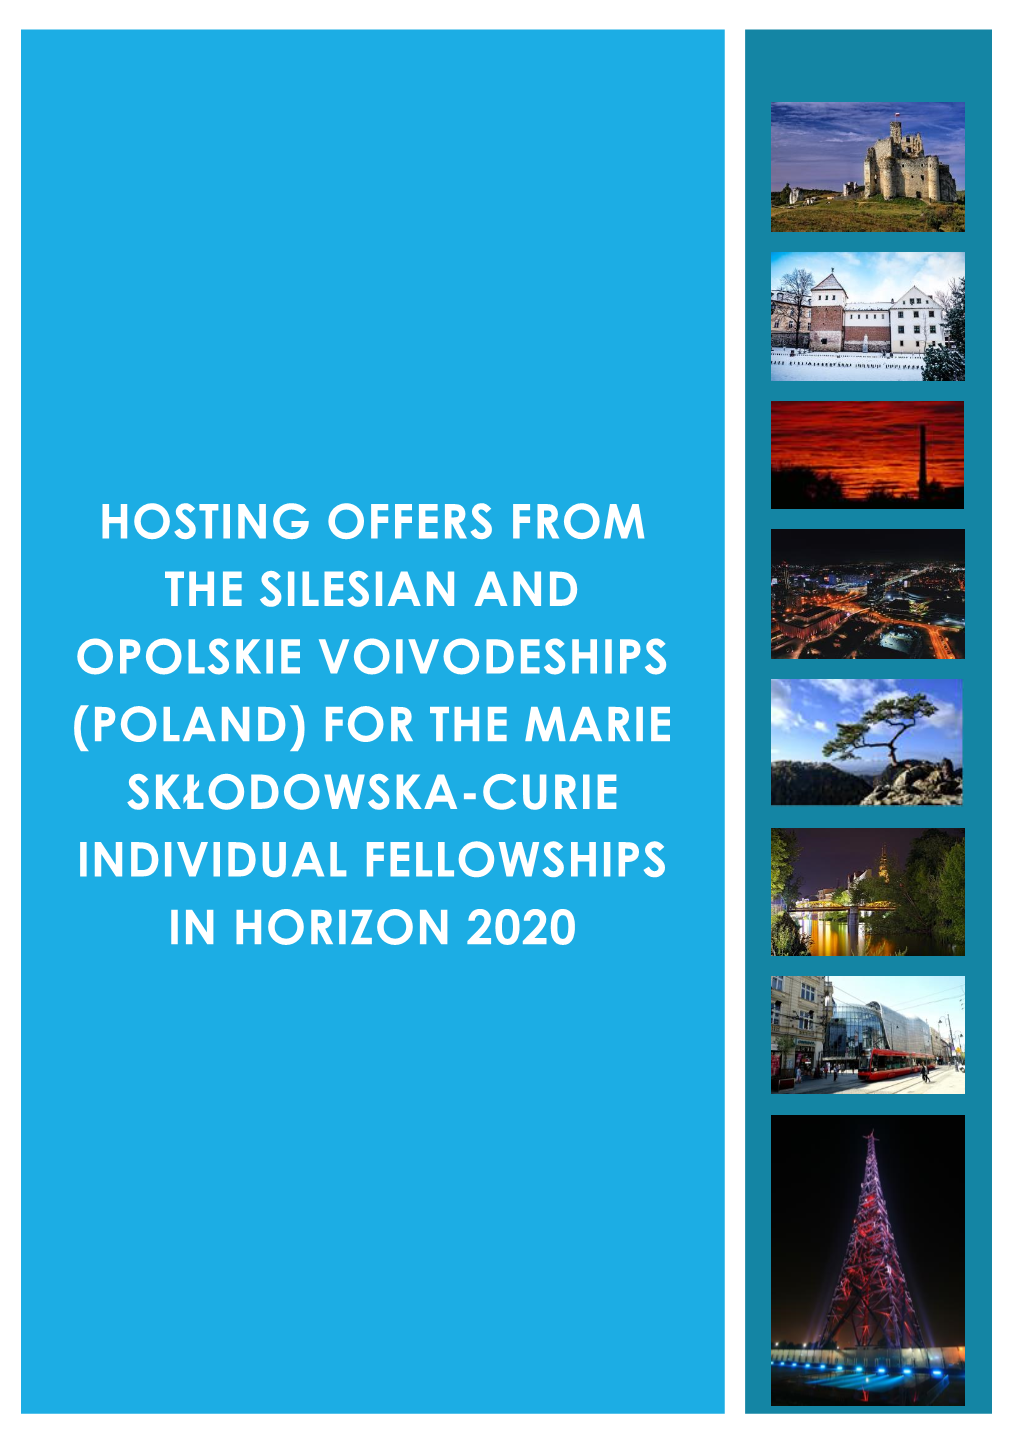 Hosting Offers from the Silesian and Opolskie Voivodeships (Poland) for the Marie